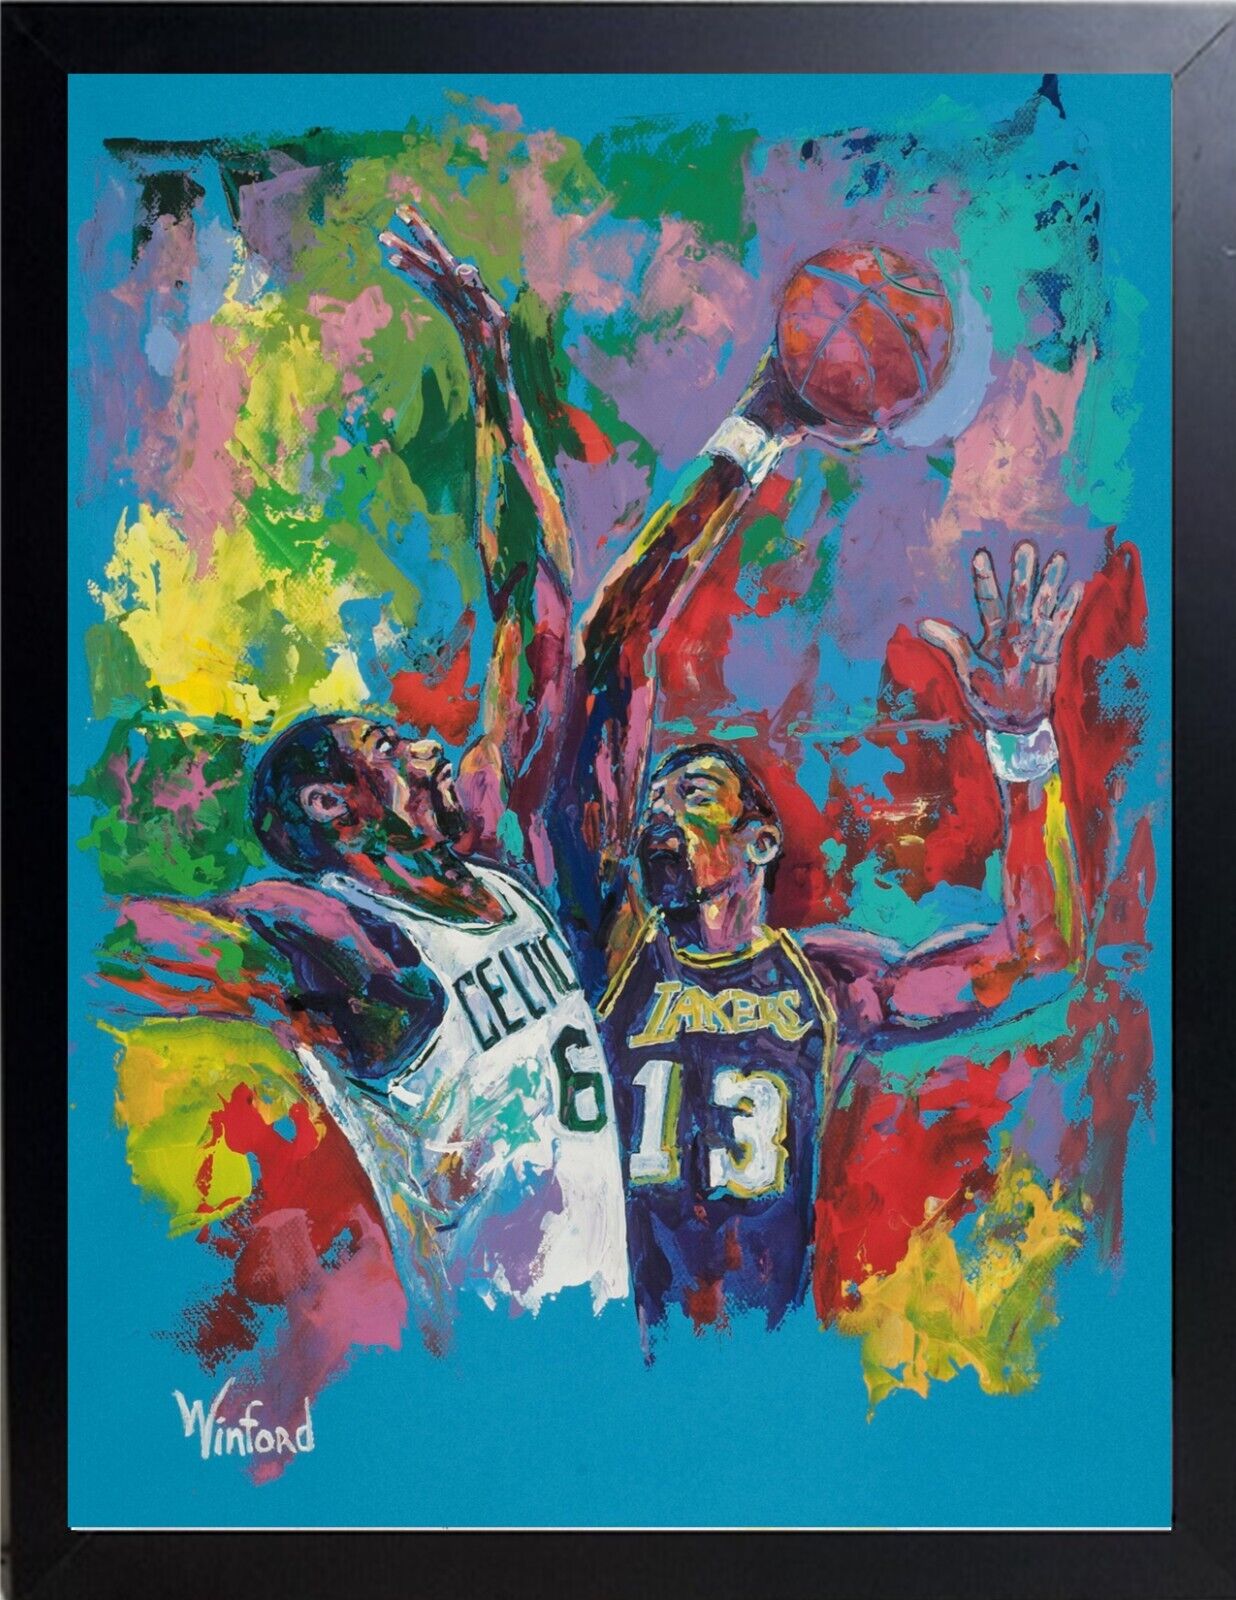 Sale Wilt Chamberlain Bill Russell Acrylic Painting Winford Was $2495 Now $595